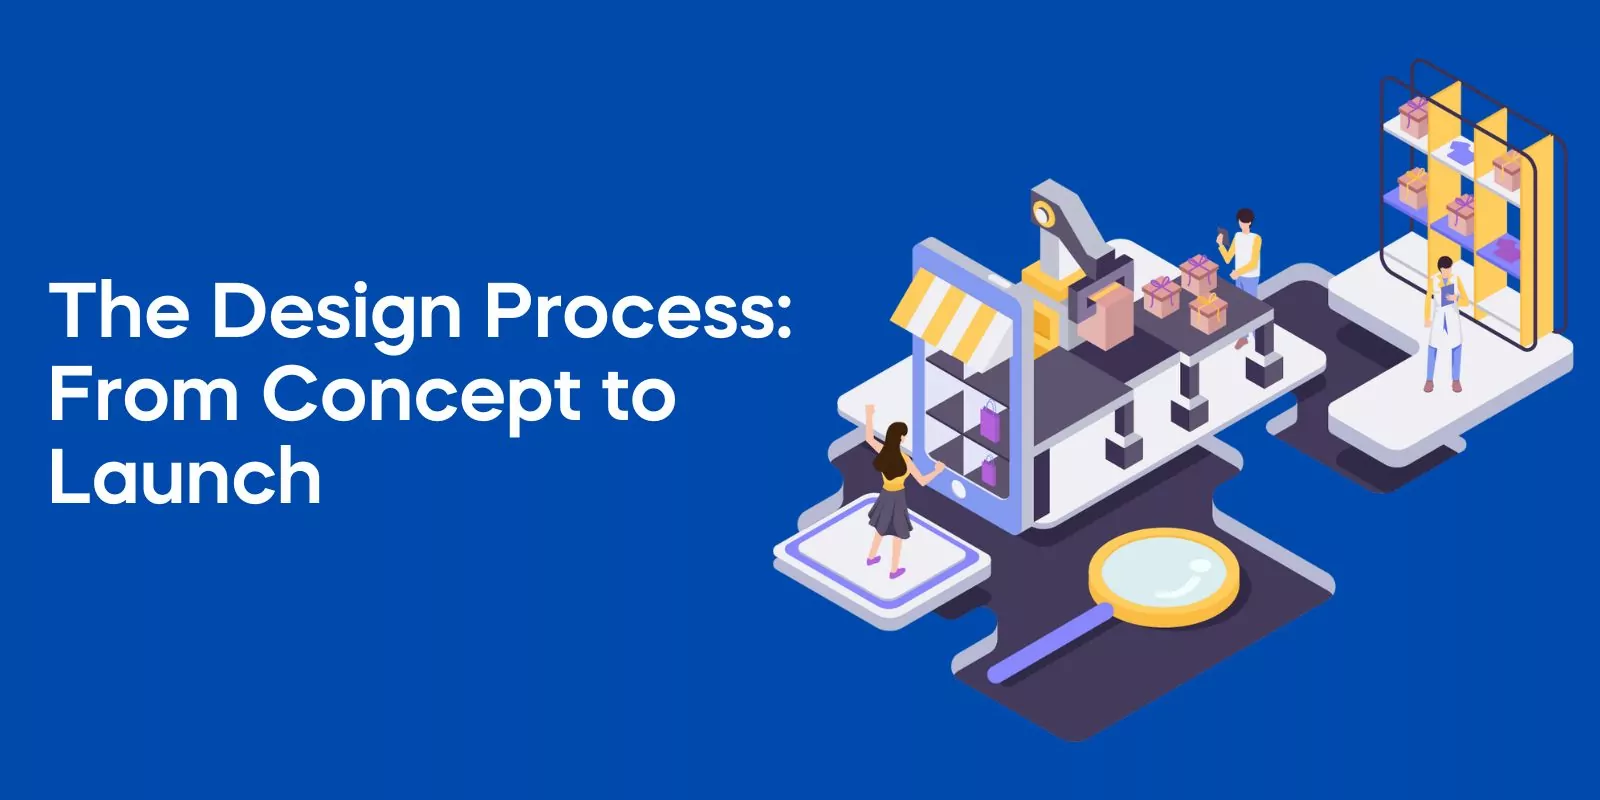 The Design Process: From Concept to Launch